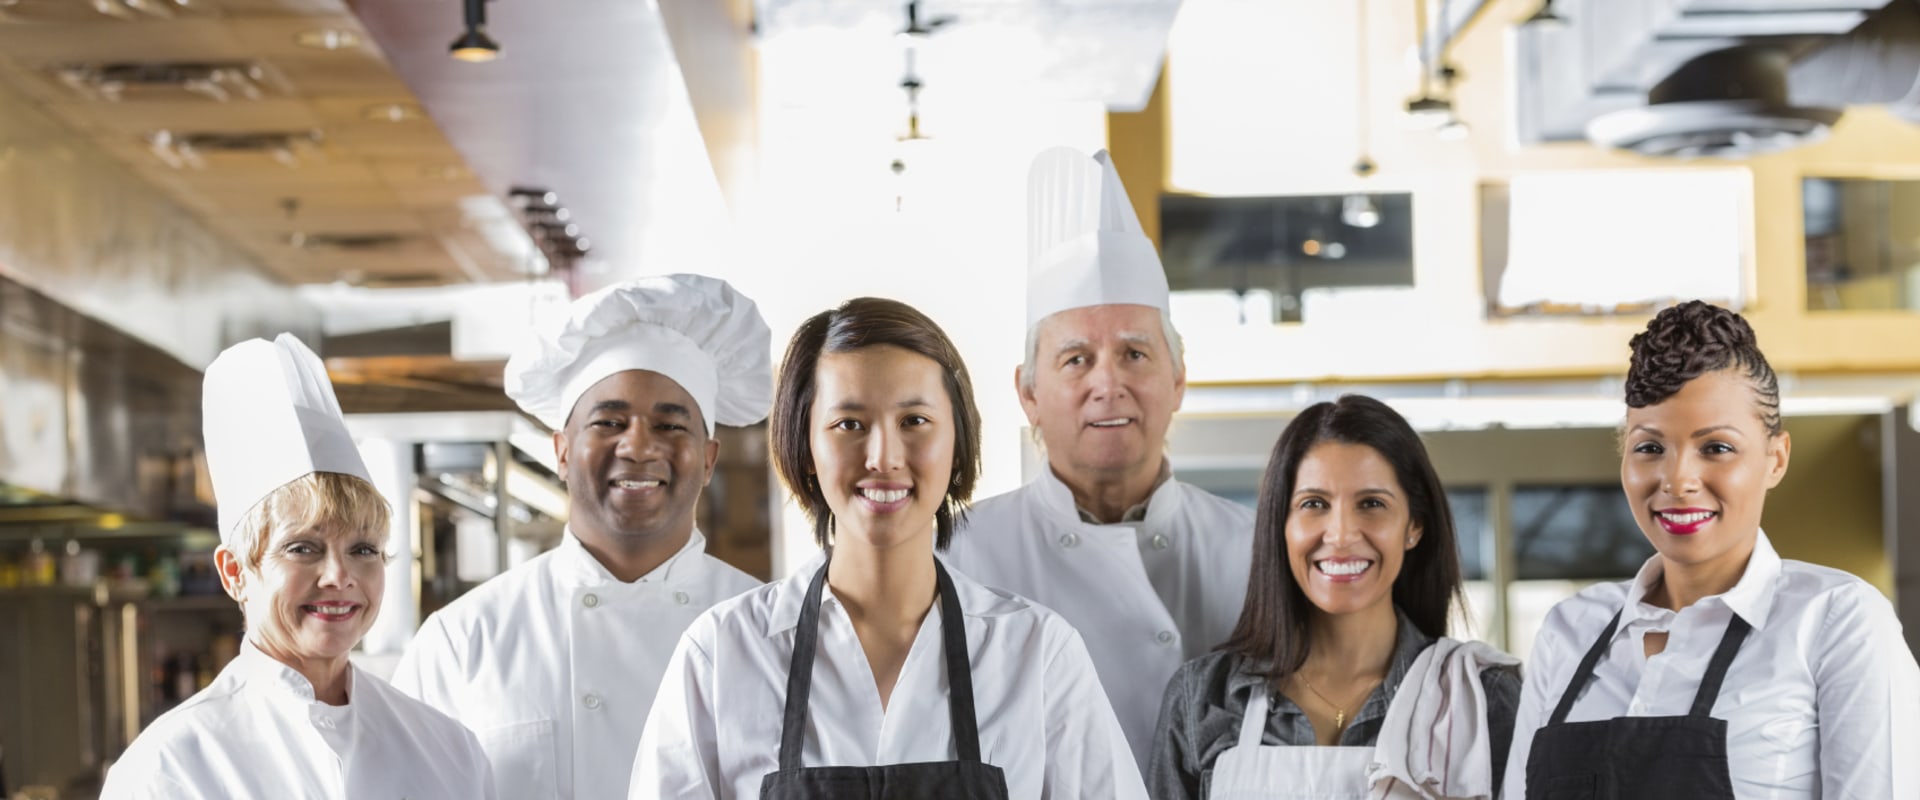 Who are the staffs in the food service?